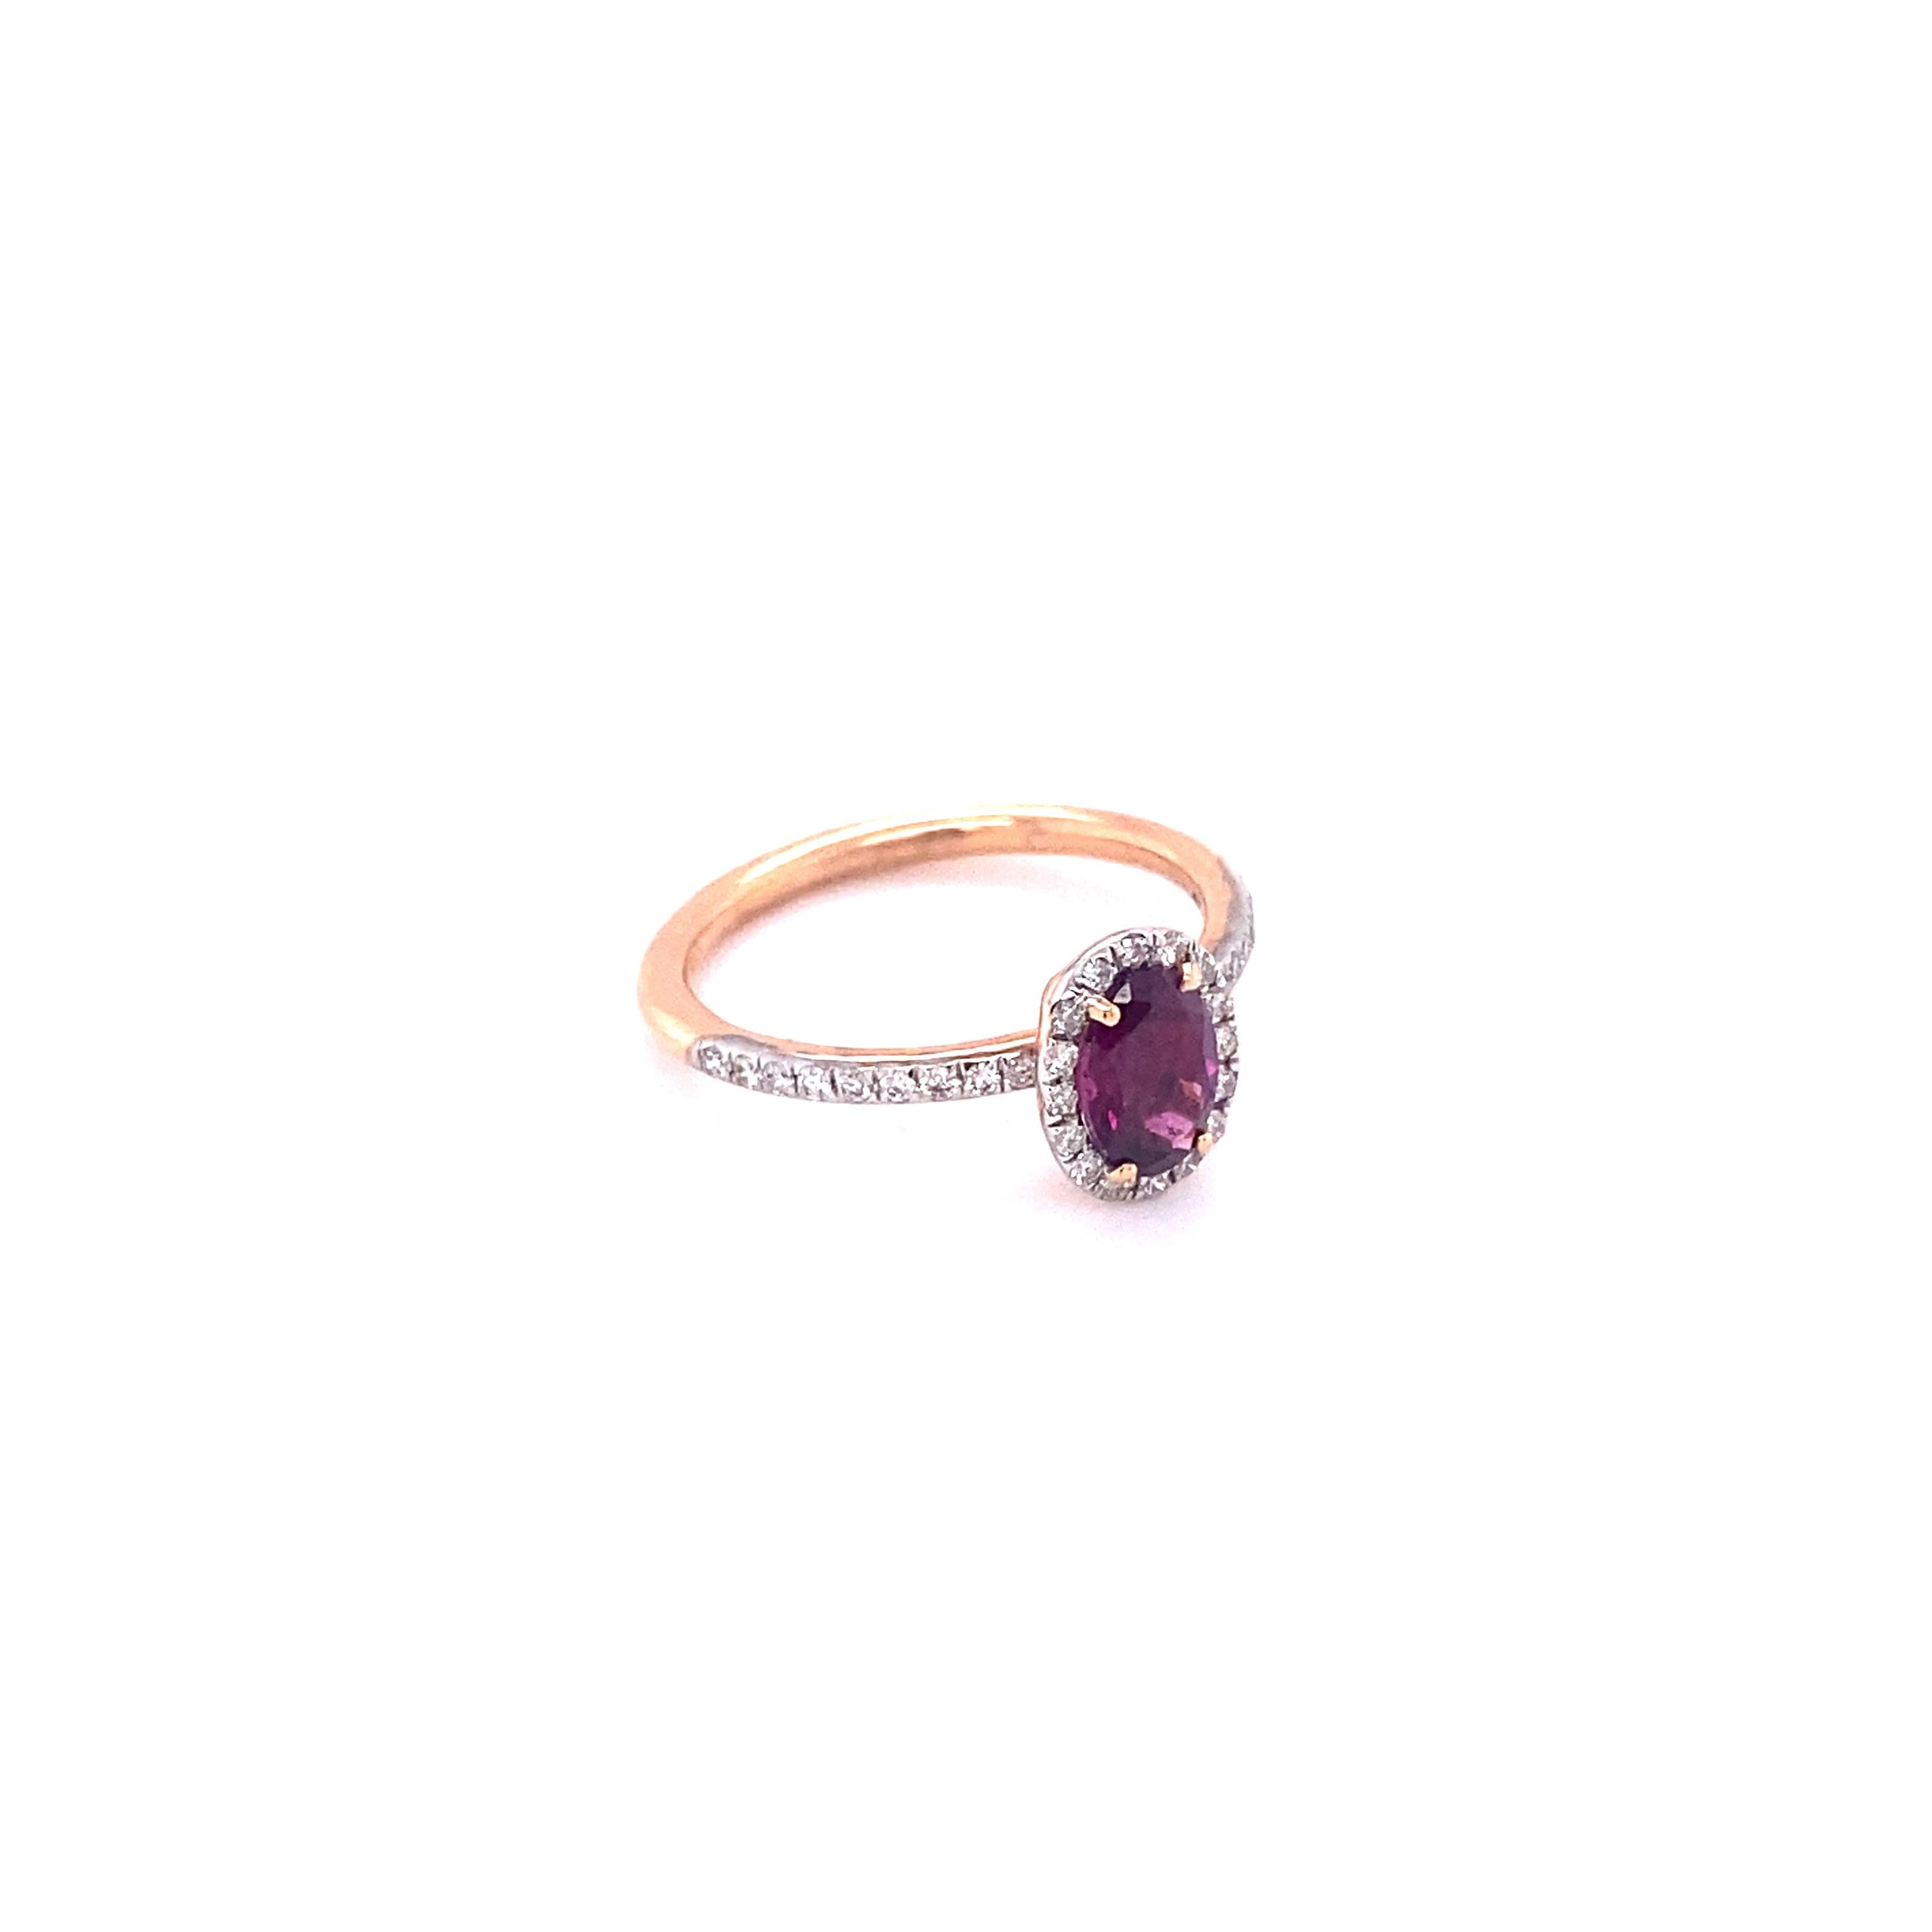 For Sale:  Gemstone Solitaire Ring Stack, 14k Solid Gold Rings with Natural Round Diamonds 12